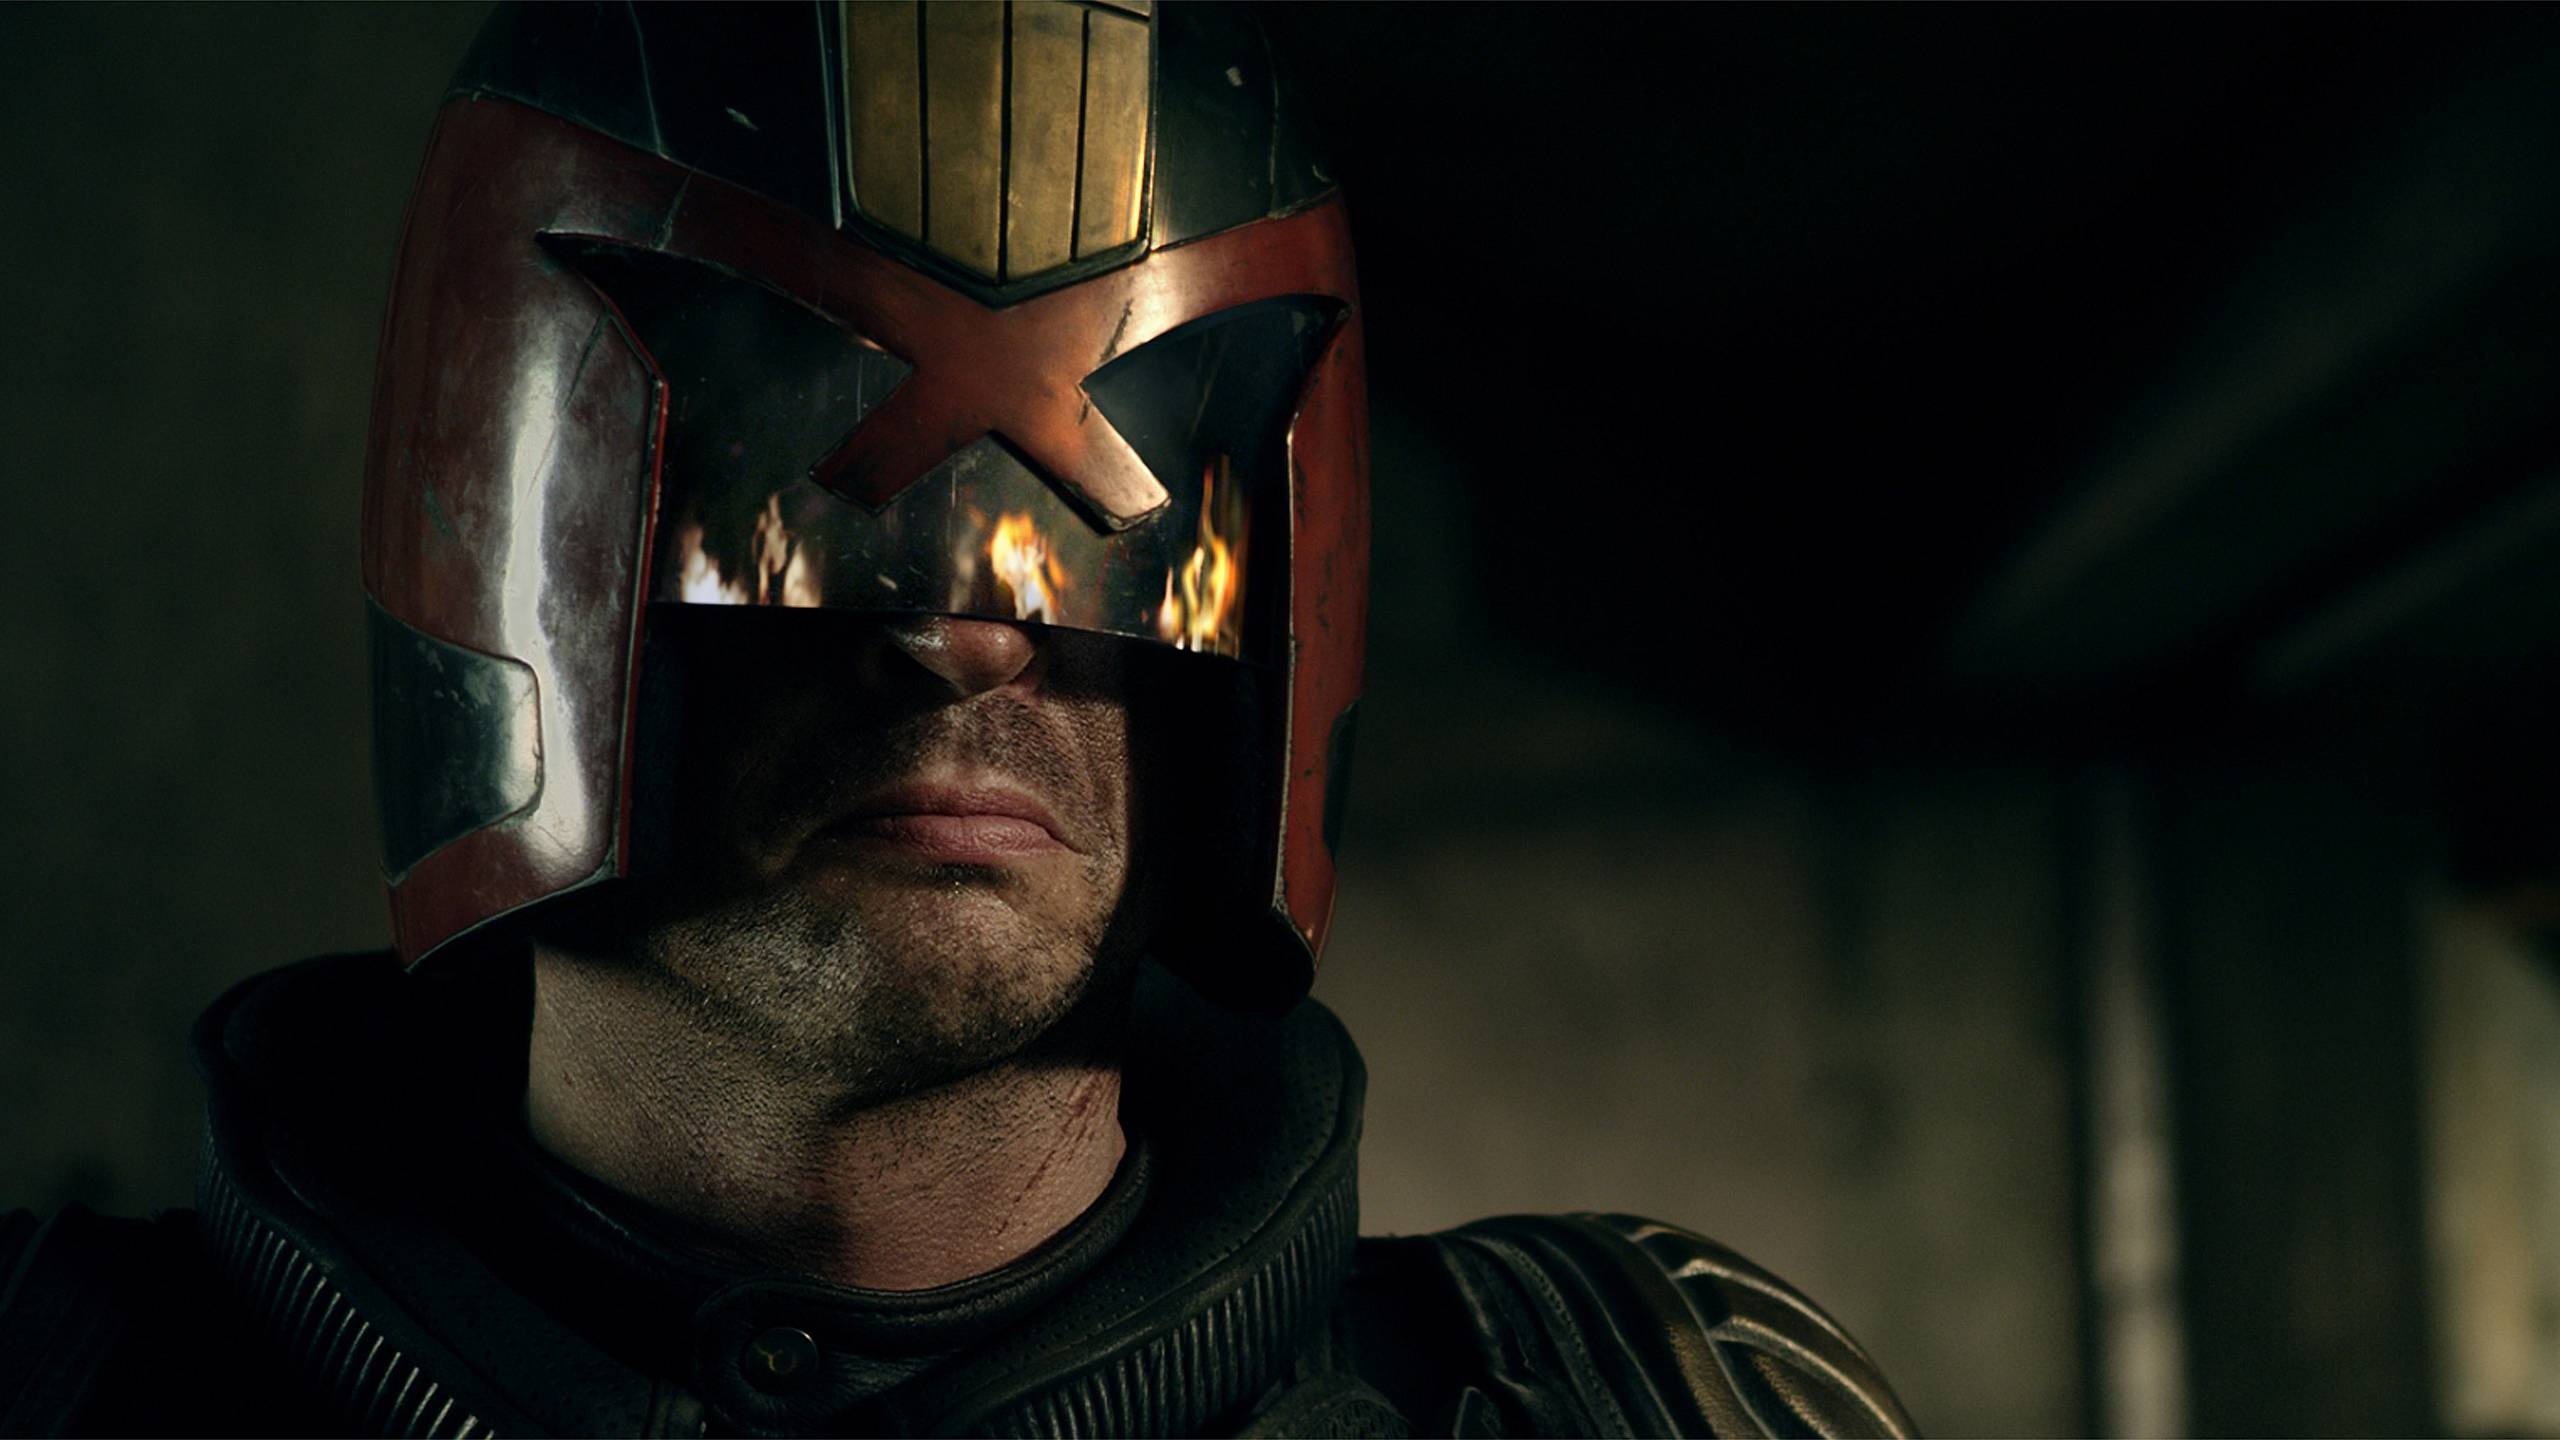 Dredd: A judicial officer in the dystopian future city of Mega-City One. 2560x1440 HD Background.